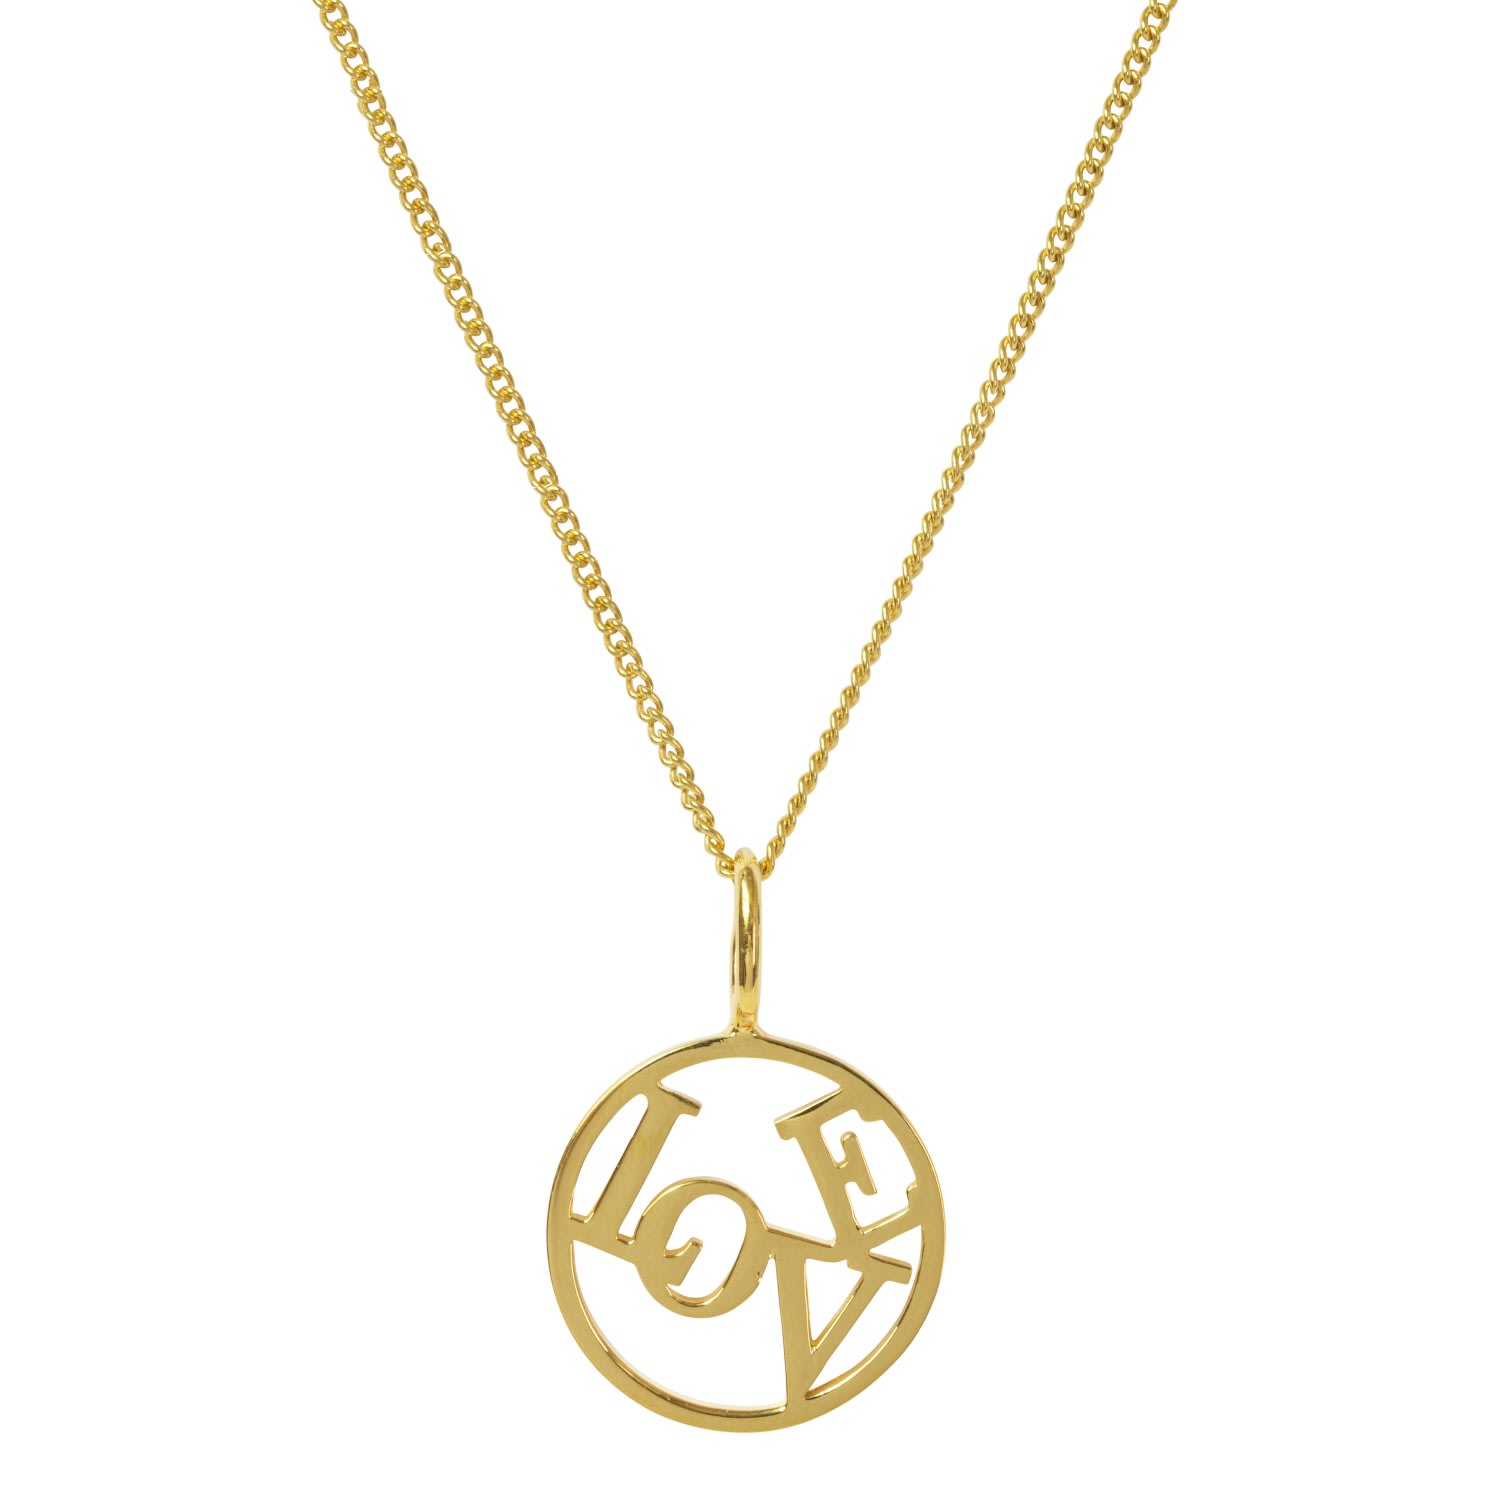 Women’s Love Medallion Yellow Gold Plated Necklace Katie Mullally